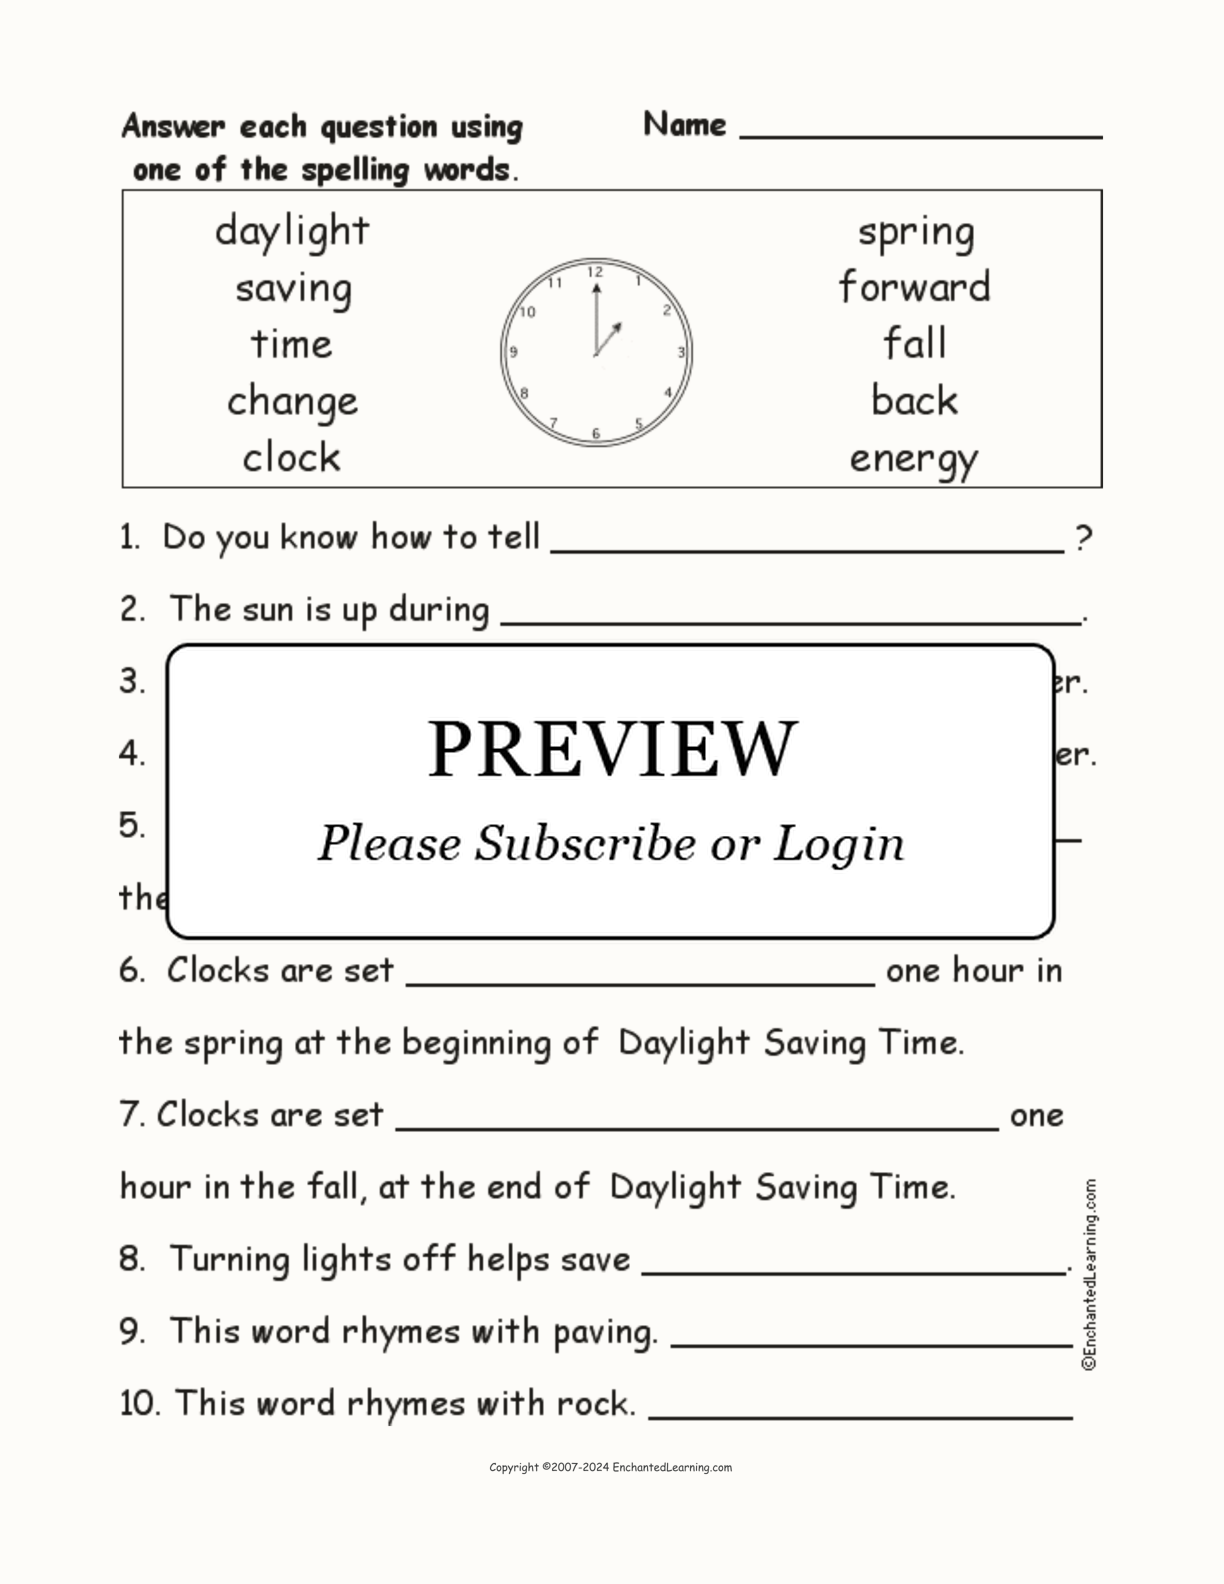 Daylight Saving Time: Spelling Word Questions interactive worksheet page 1